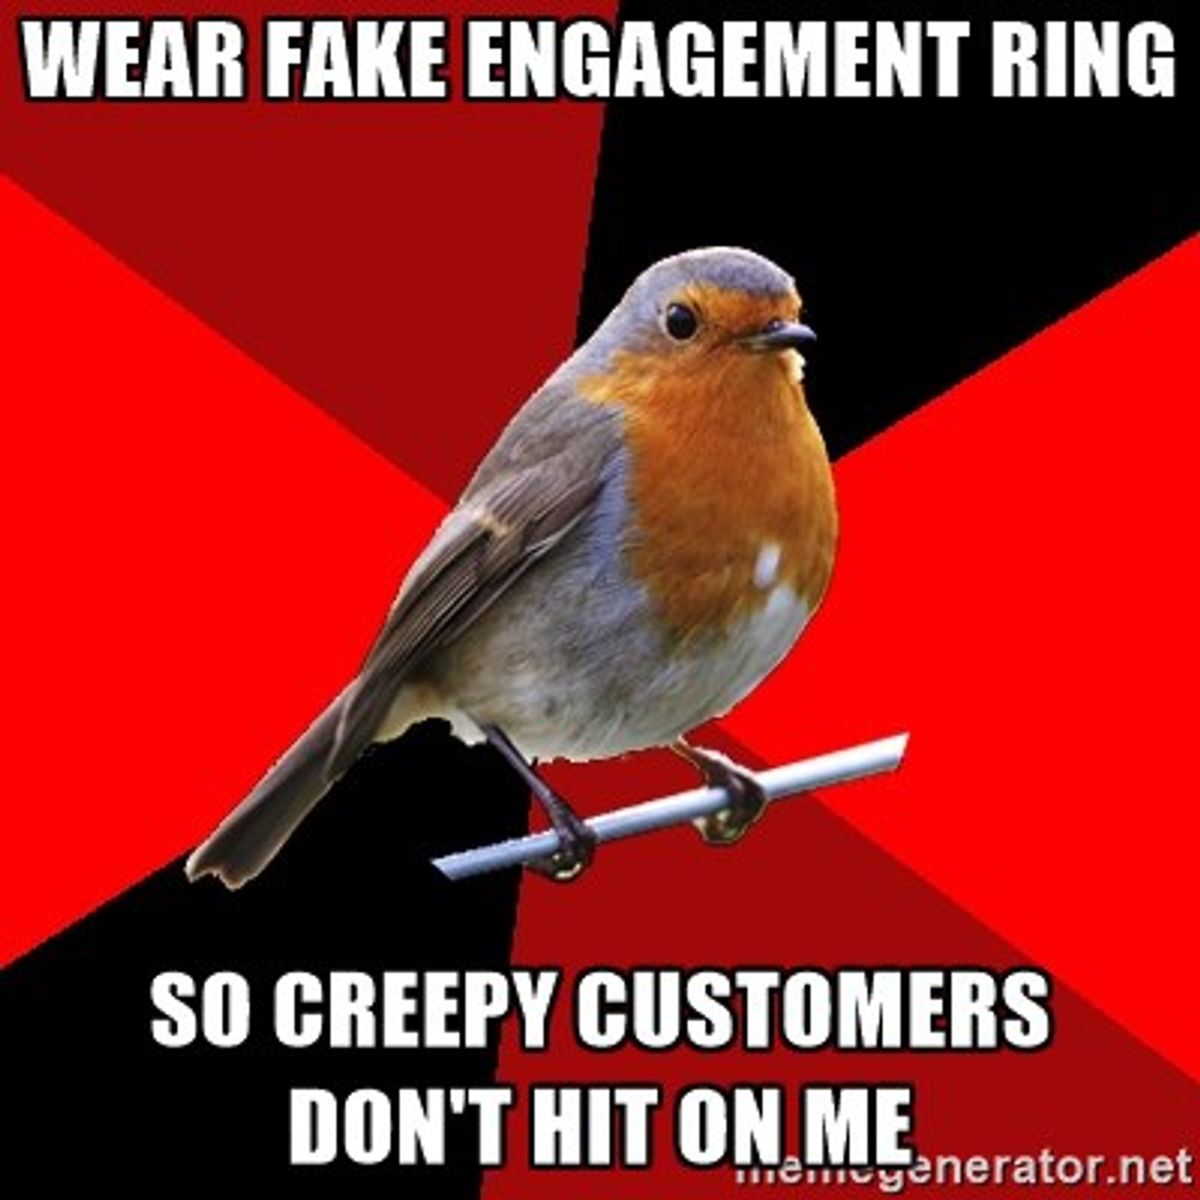 20 Ways No To Be A Creep To Women In Customer Service/Retail